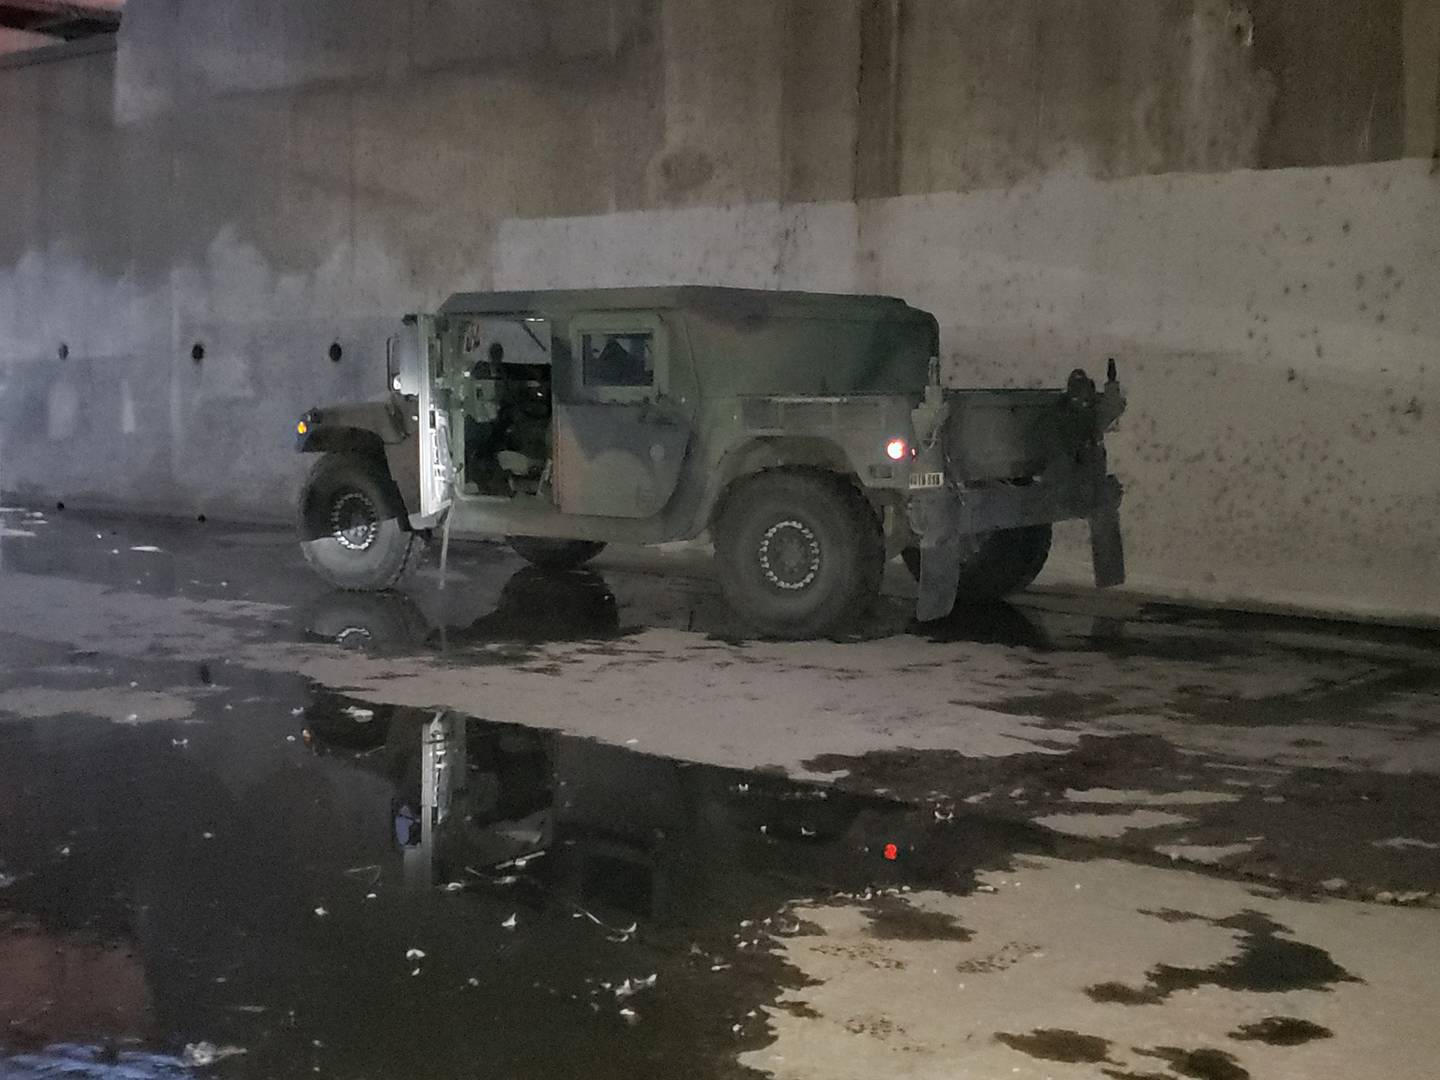 This photo provided by the FBI Los Angeles shows a military Humvee that was stolen from a National Guard facility in a Los Angeles suburb and was found Wednesday, Jan. 20, 2021.